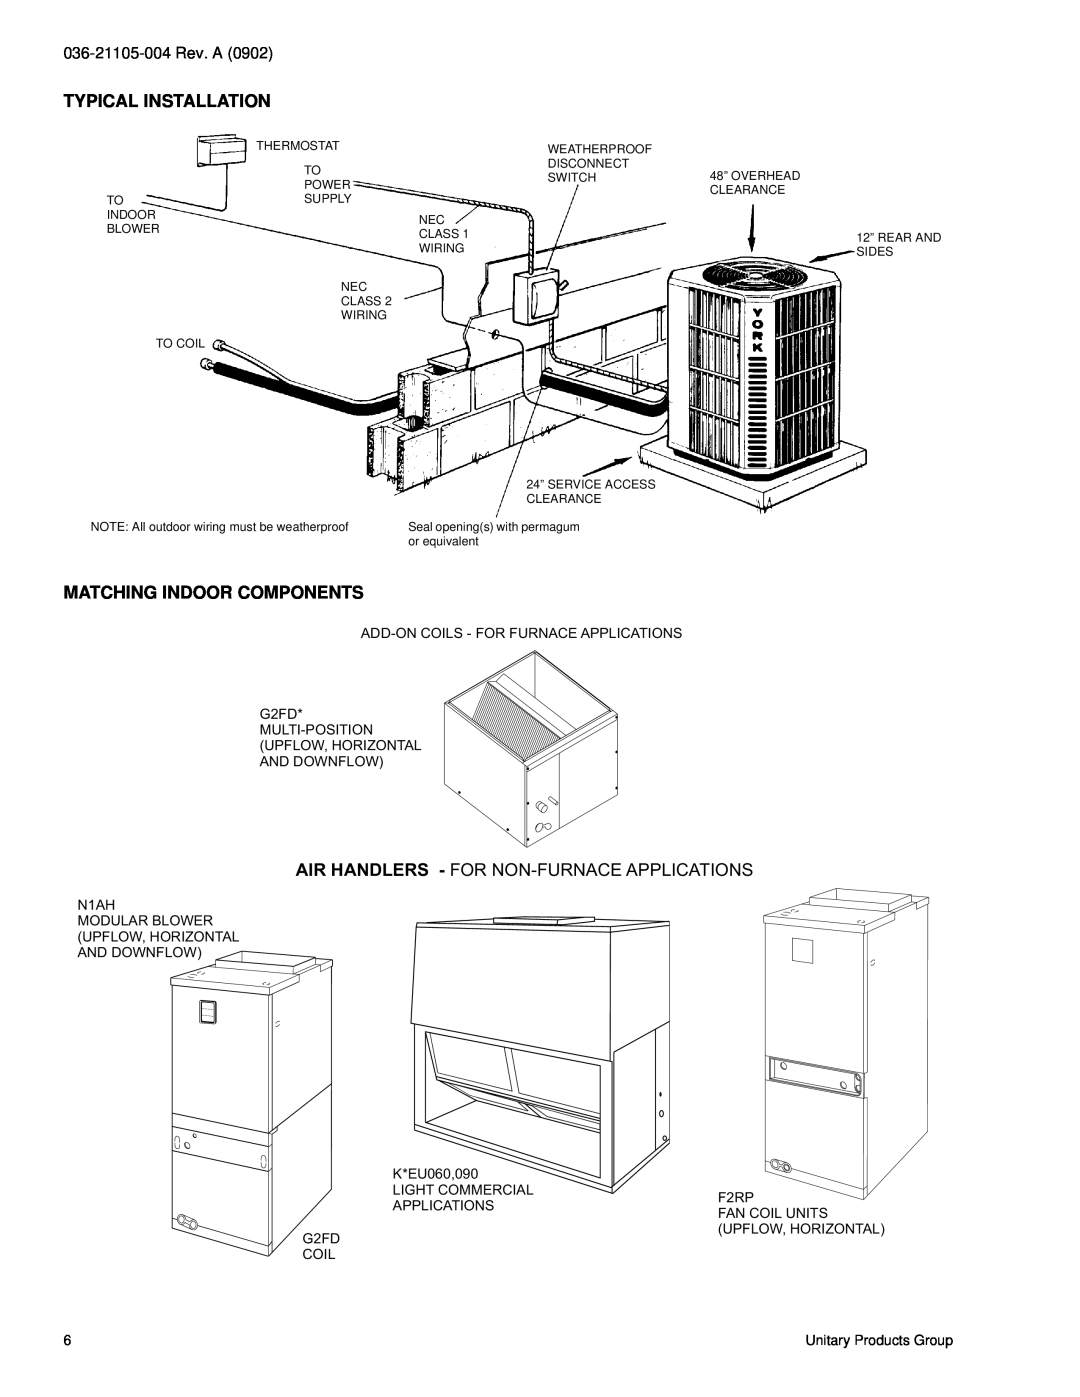 York H*DA012 specifications Typical Installation, Matching Indoor Components, Air Handlers - For Non-Furnaceapplications 